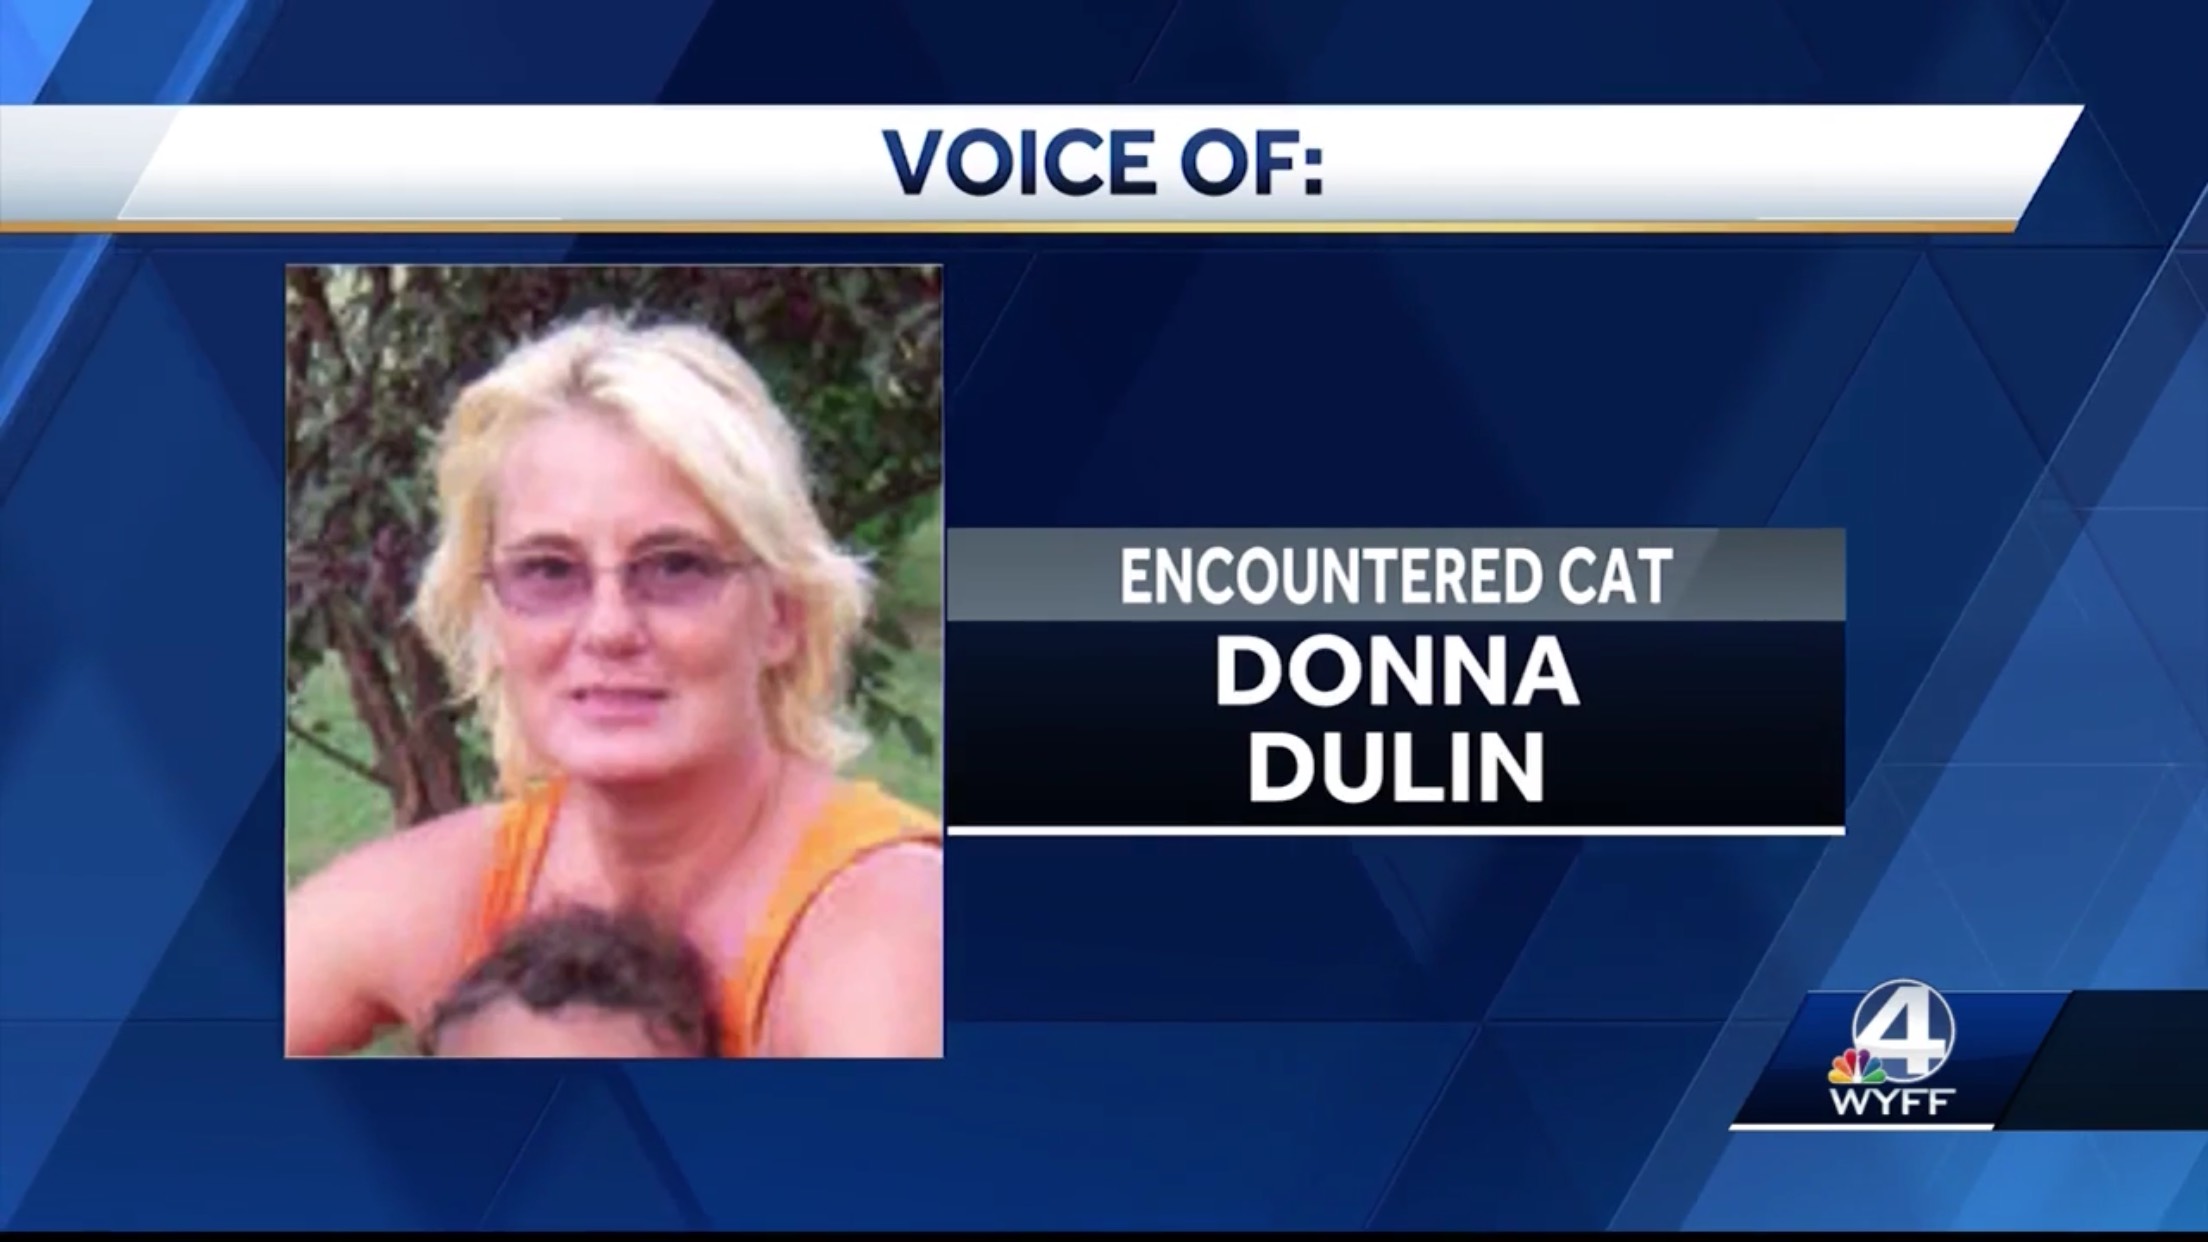 Donna Dulin: Encountered Cat